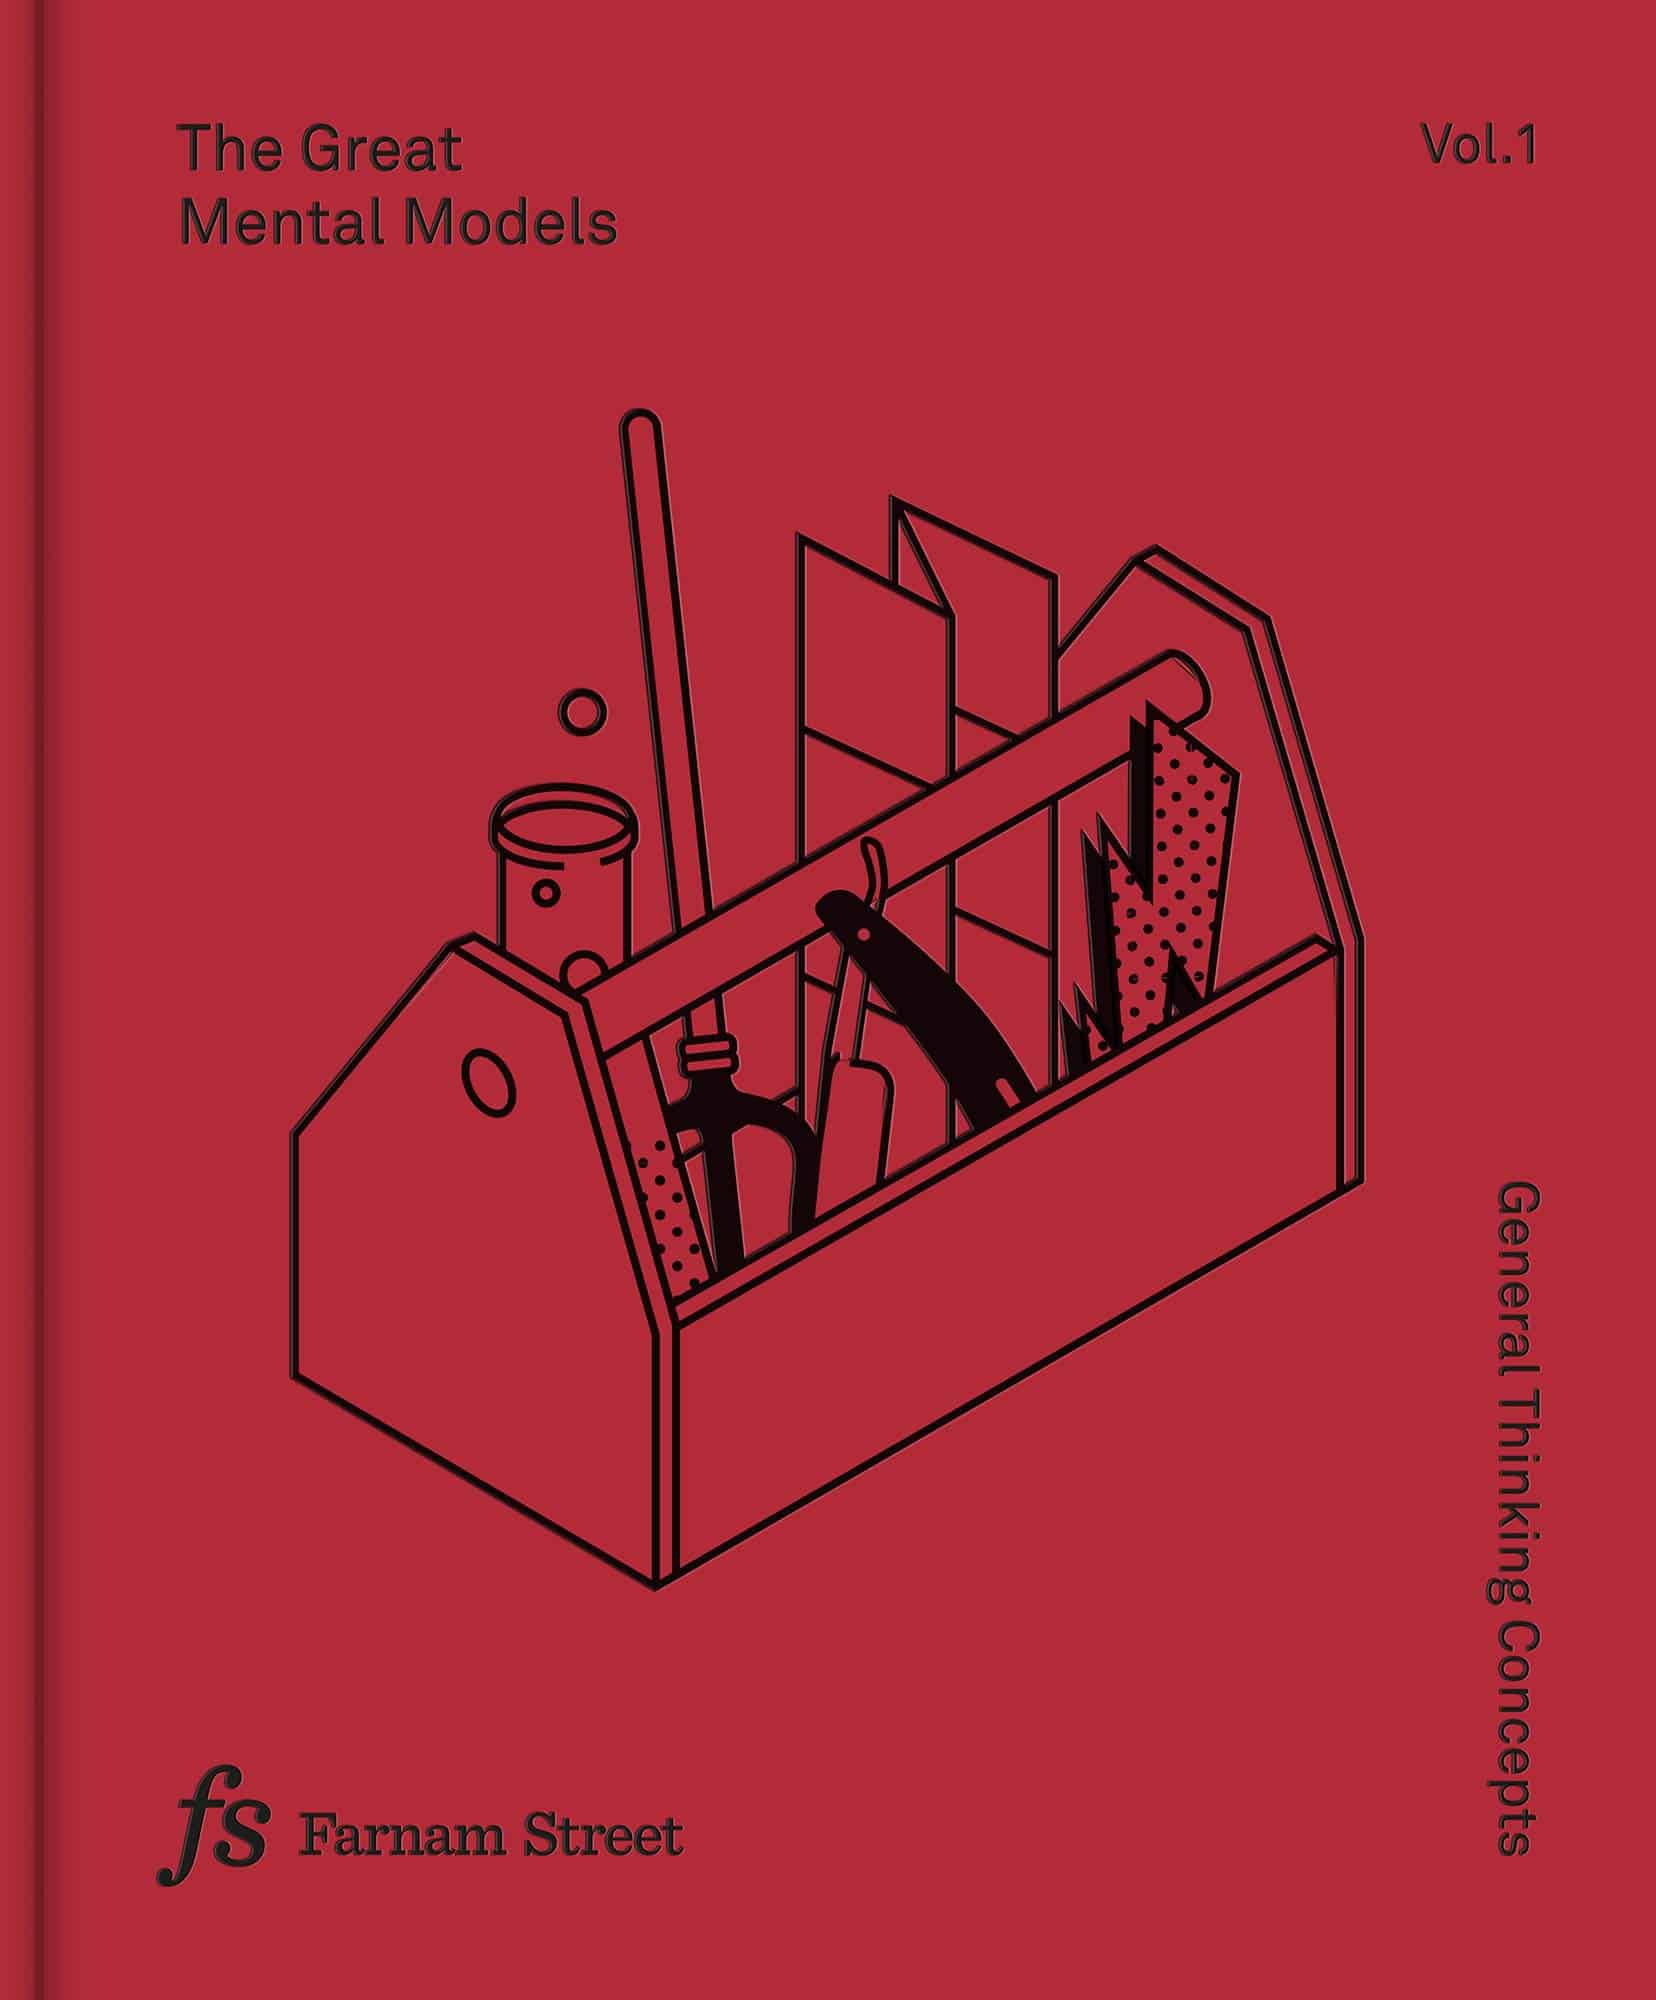 An Intro to General Thinking Concepts: “The Great Mental Models Volume 1” by Farnam Street (Book Summary)